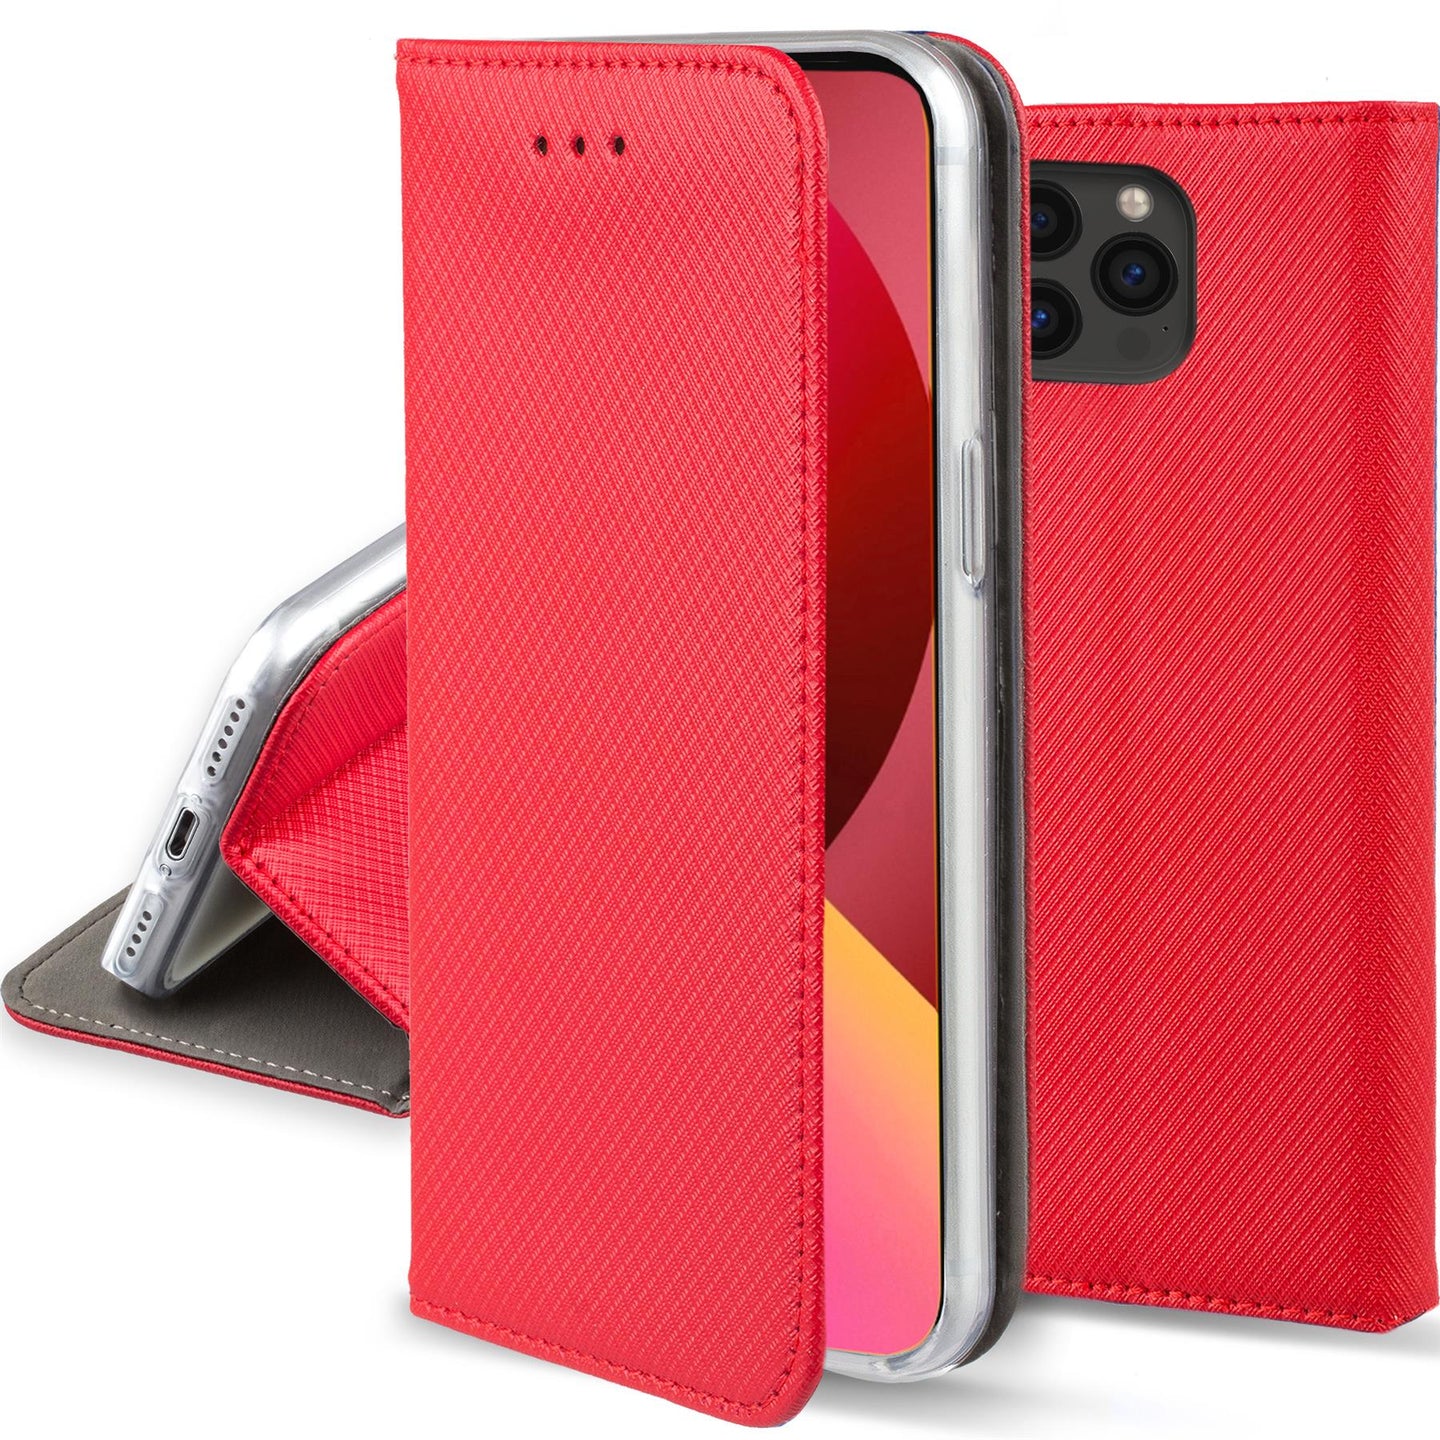 Moozy Case Flip Cover for iPhone 13 Pro Max, Red - Smart Magnetic Flip Case Flip Folio Wallet Case with Card Holder and Stand, Credit Card Slots